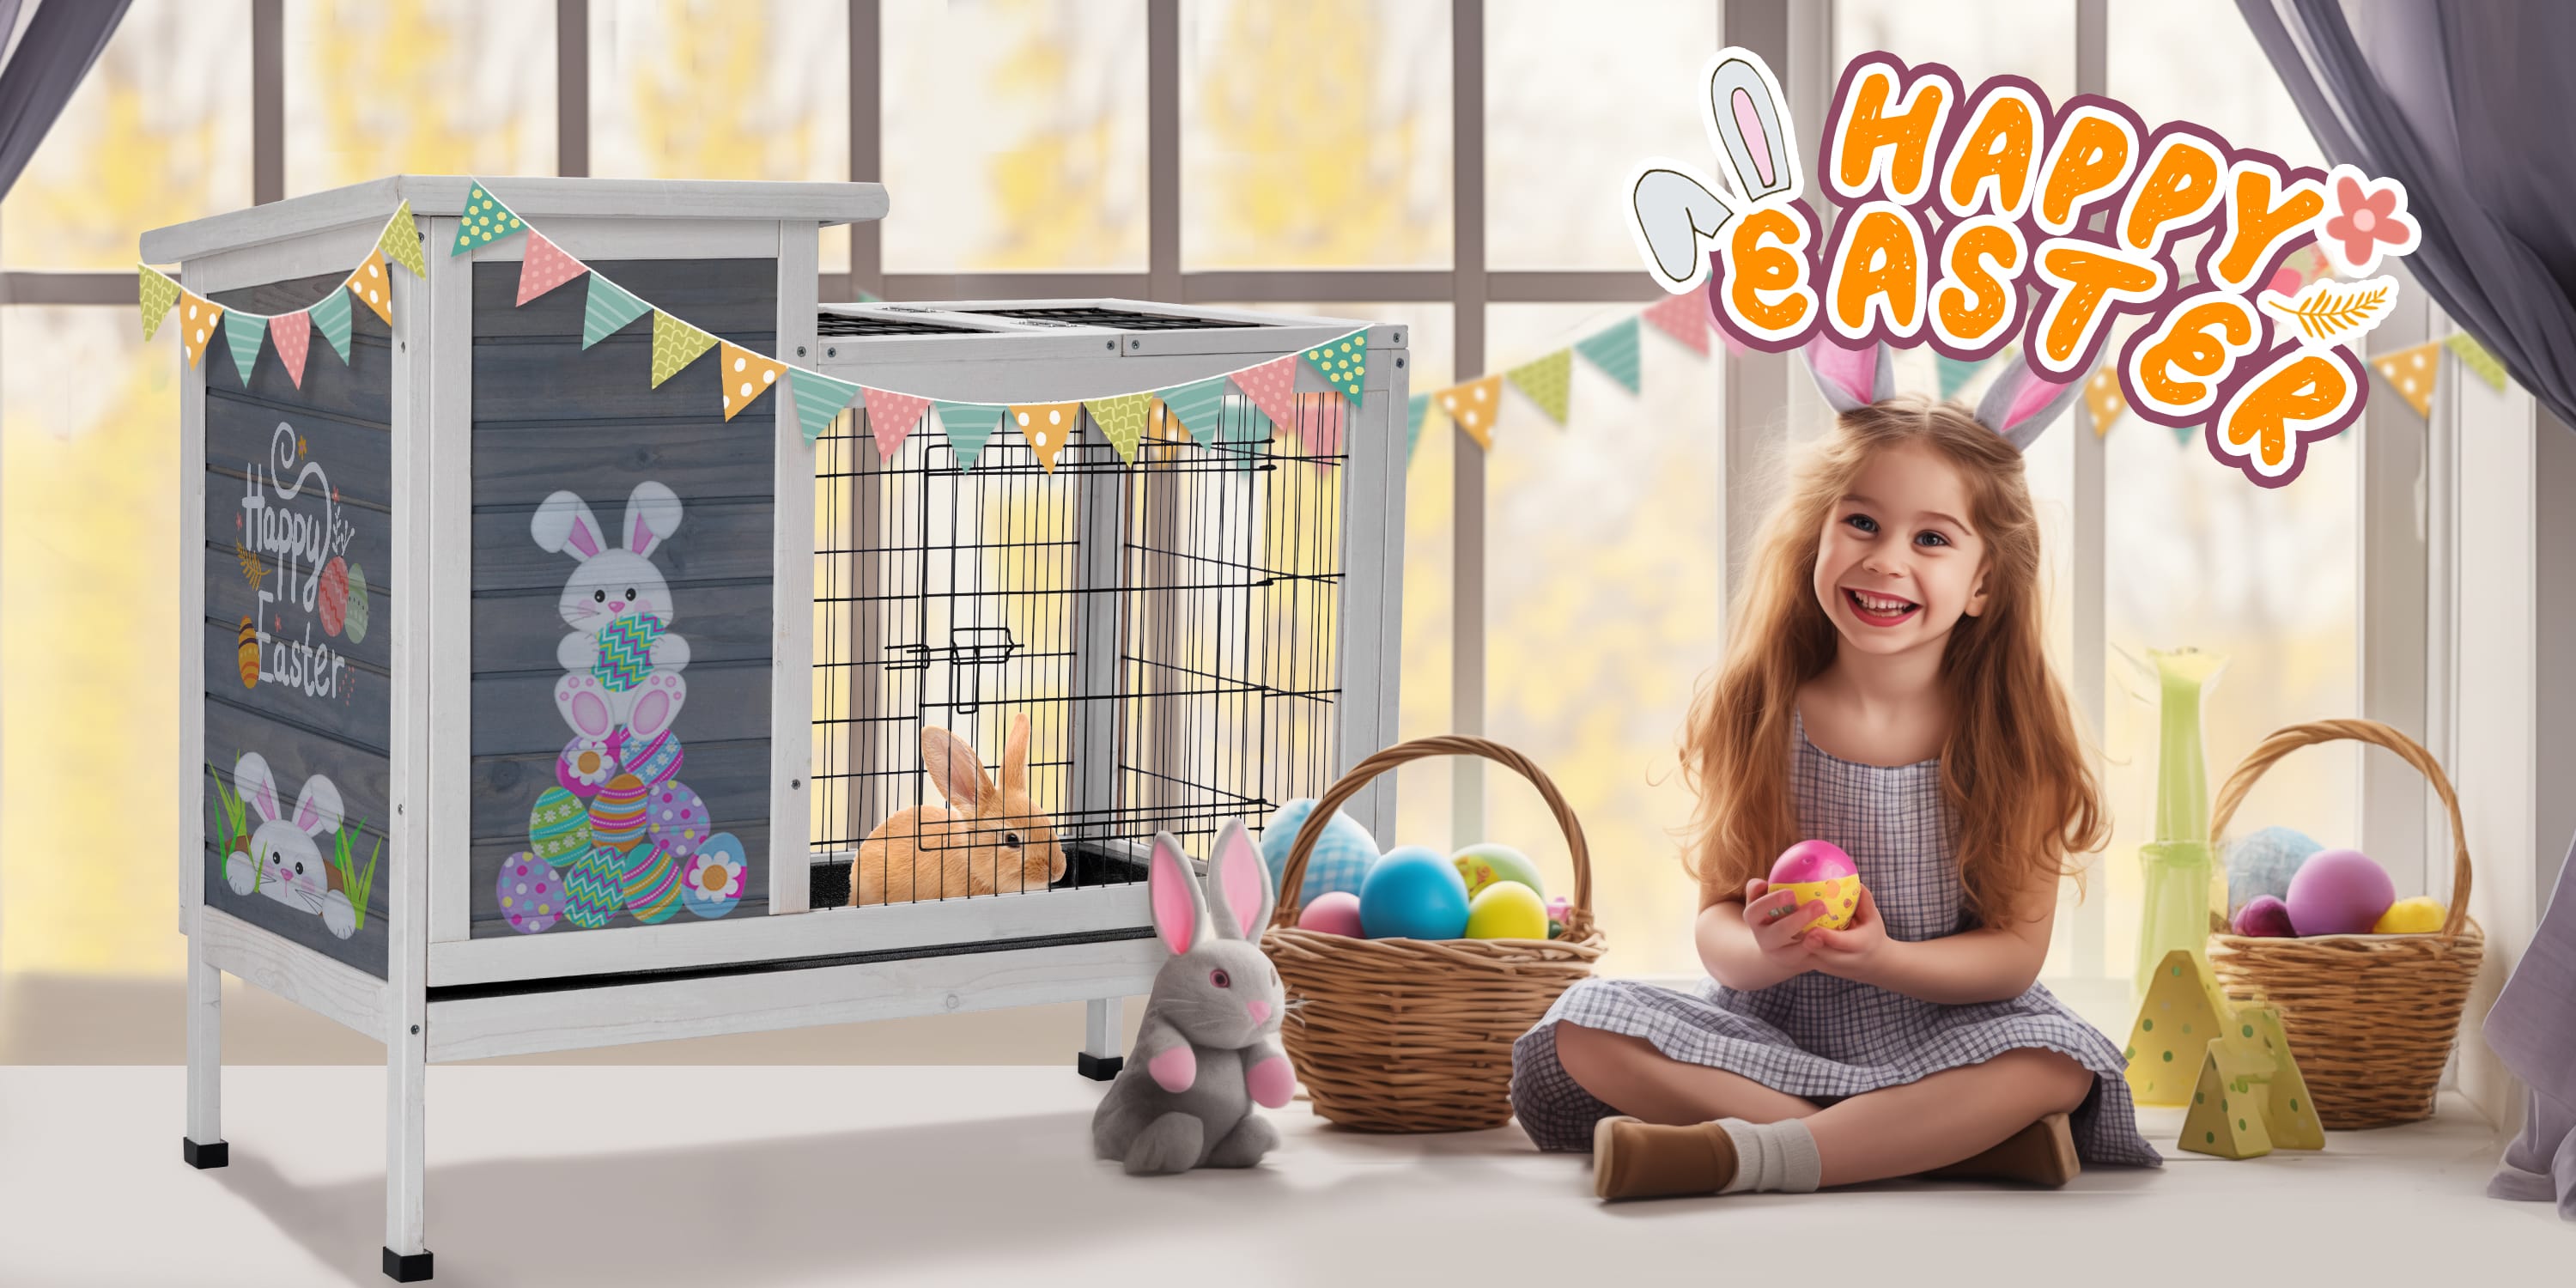 PETSFIT-HAPPY-EASTER-DAY-FOR-SALE